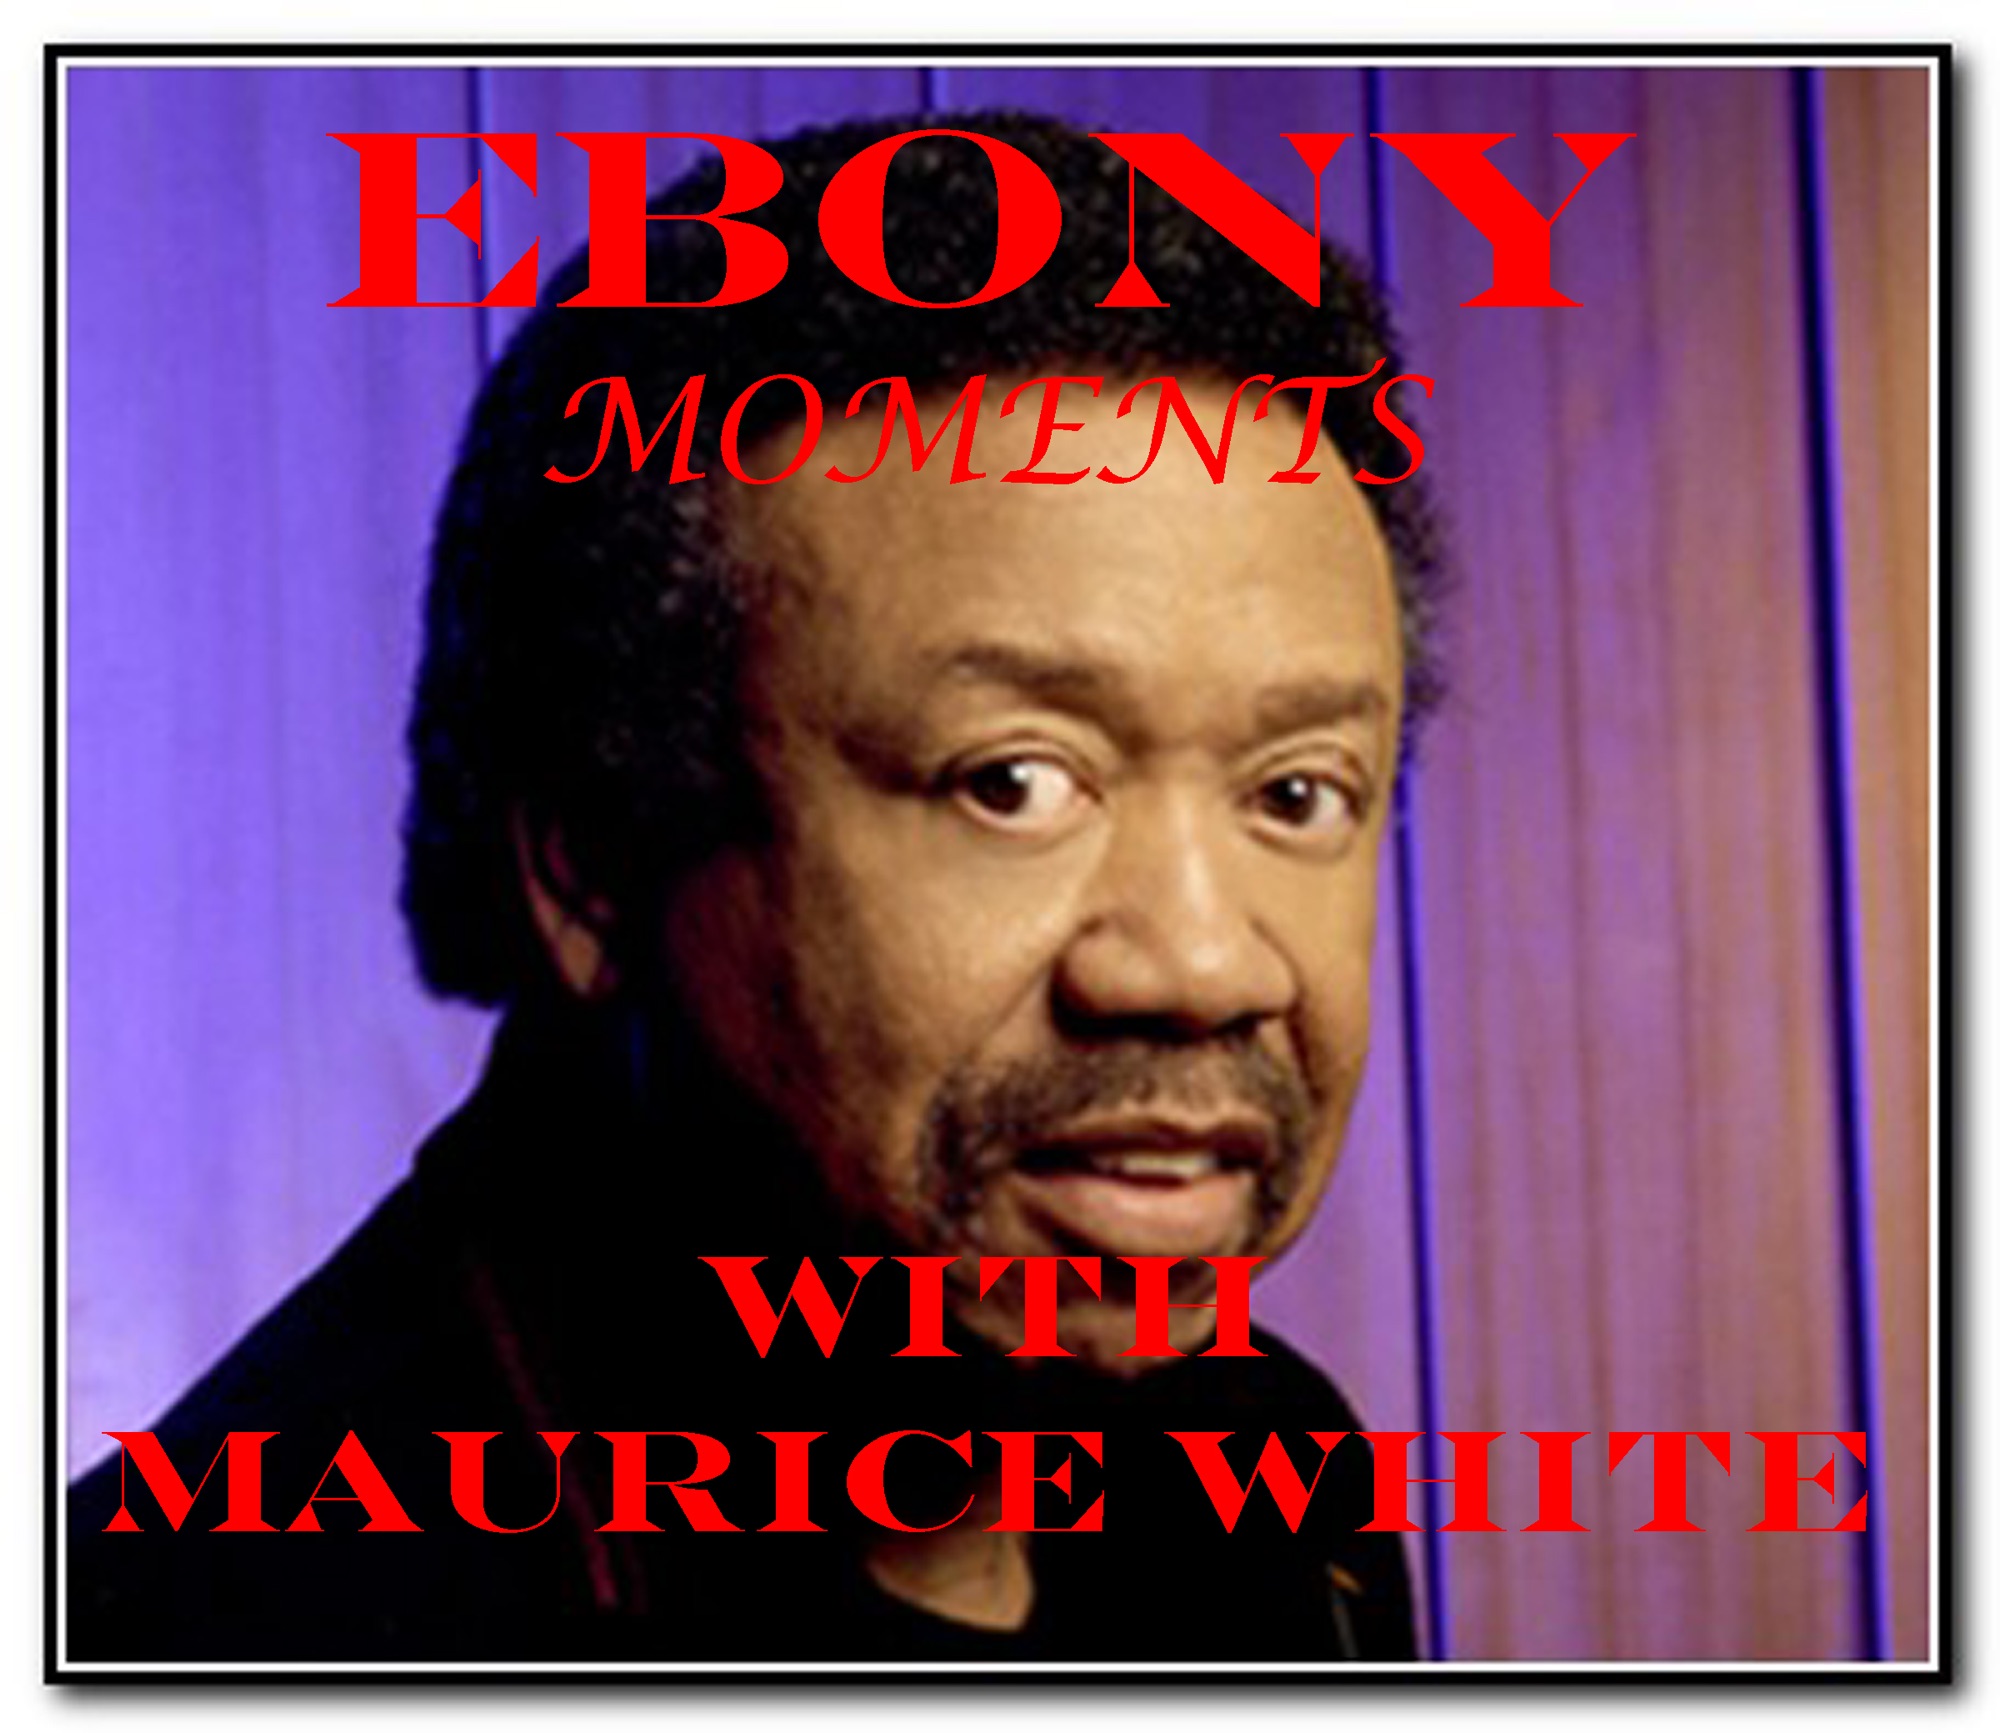 Art for Ebony Moments With Maurice White by Maurice White